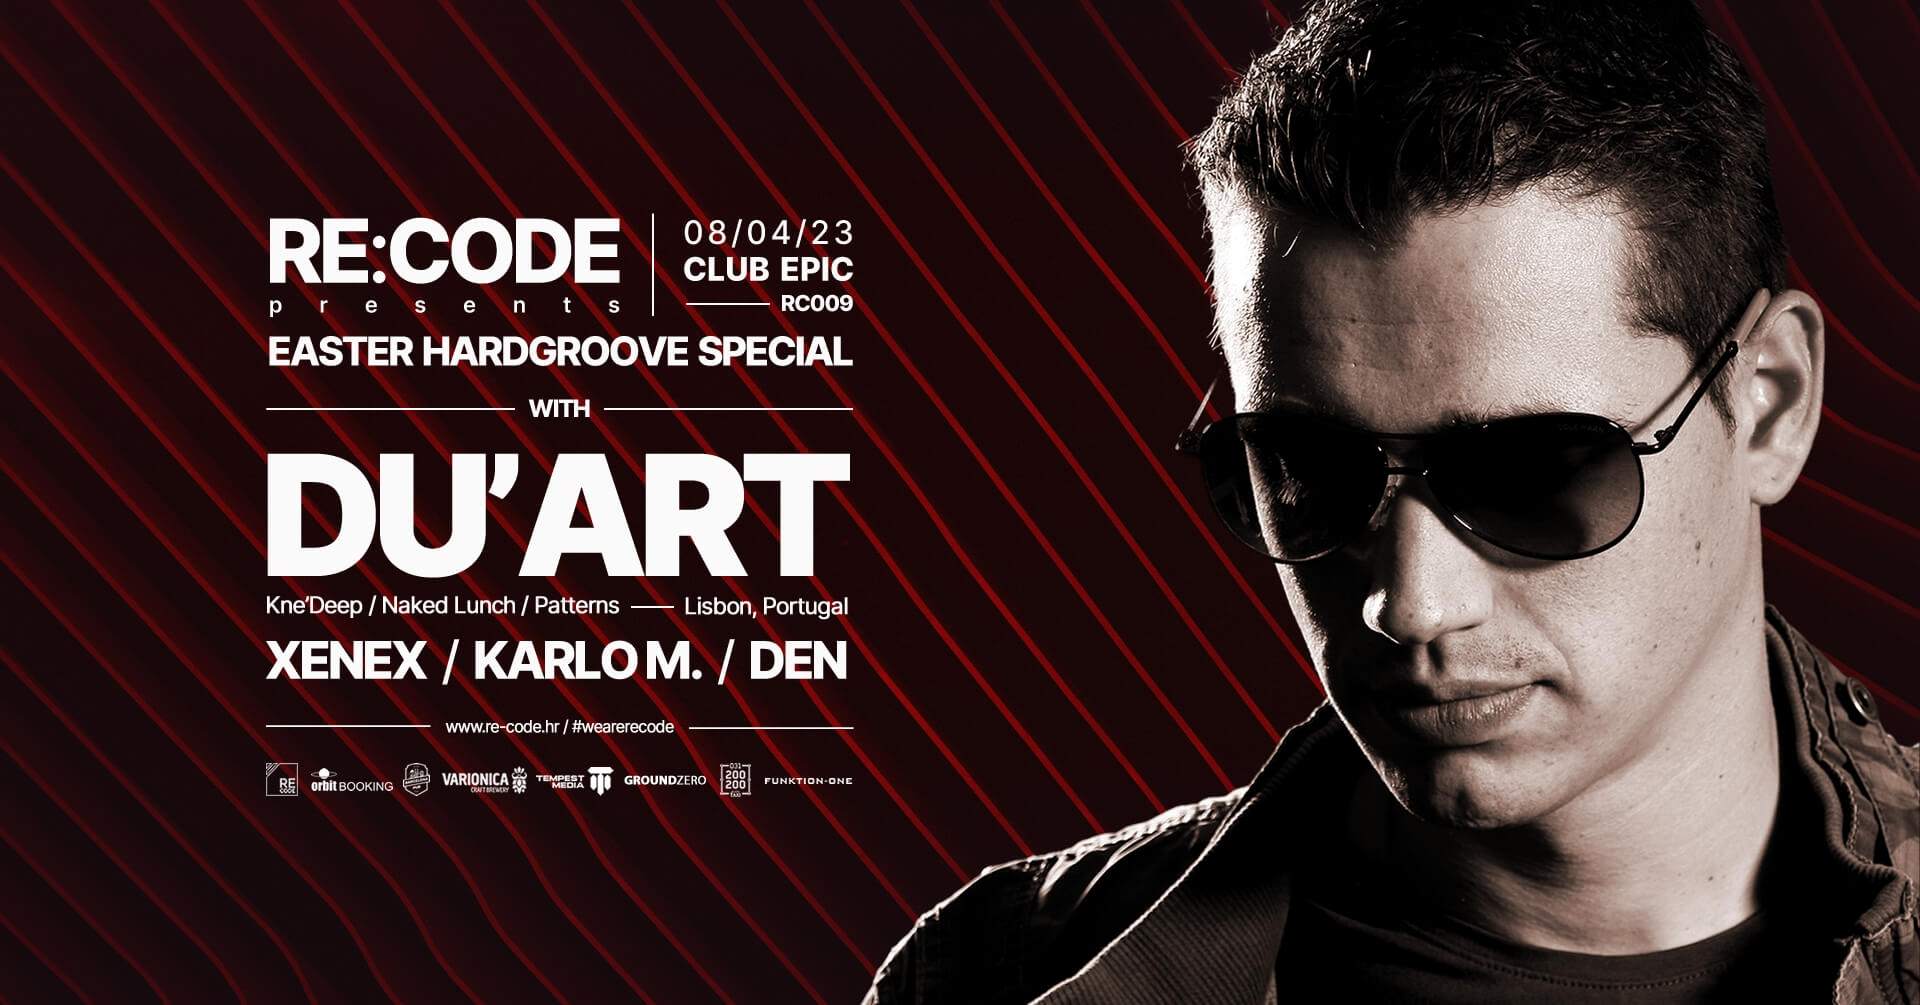 Re:Code pres. Easter Hardgroove Special with Du/ArT - Página frontal